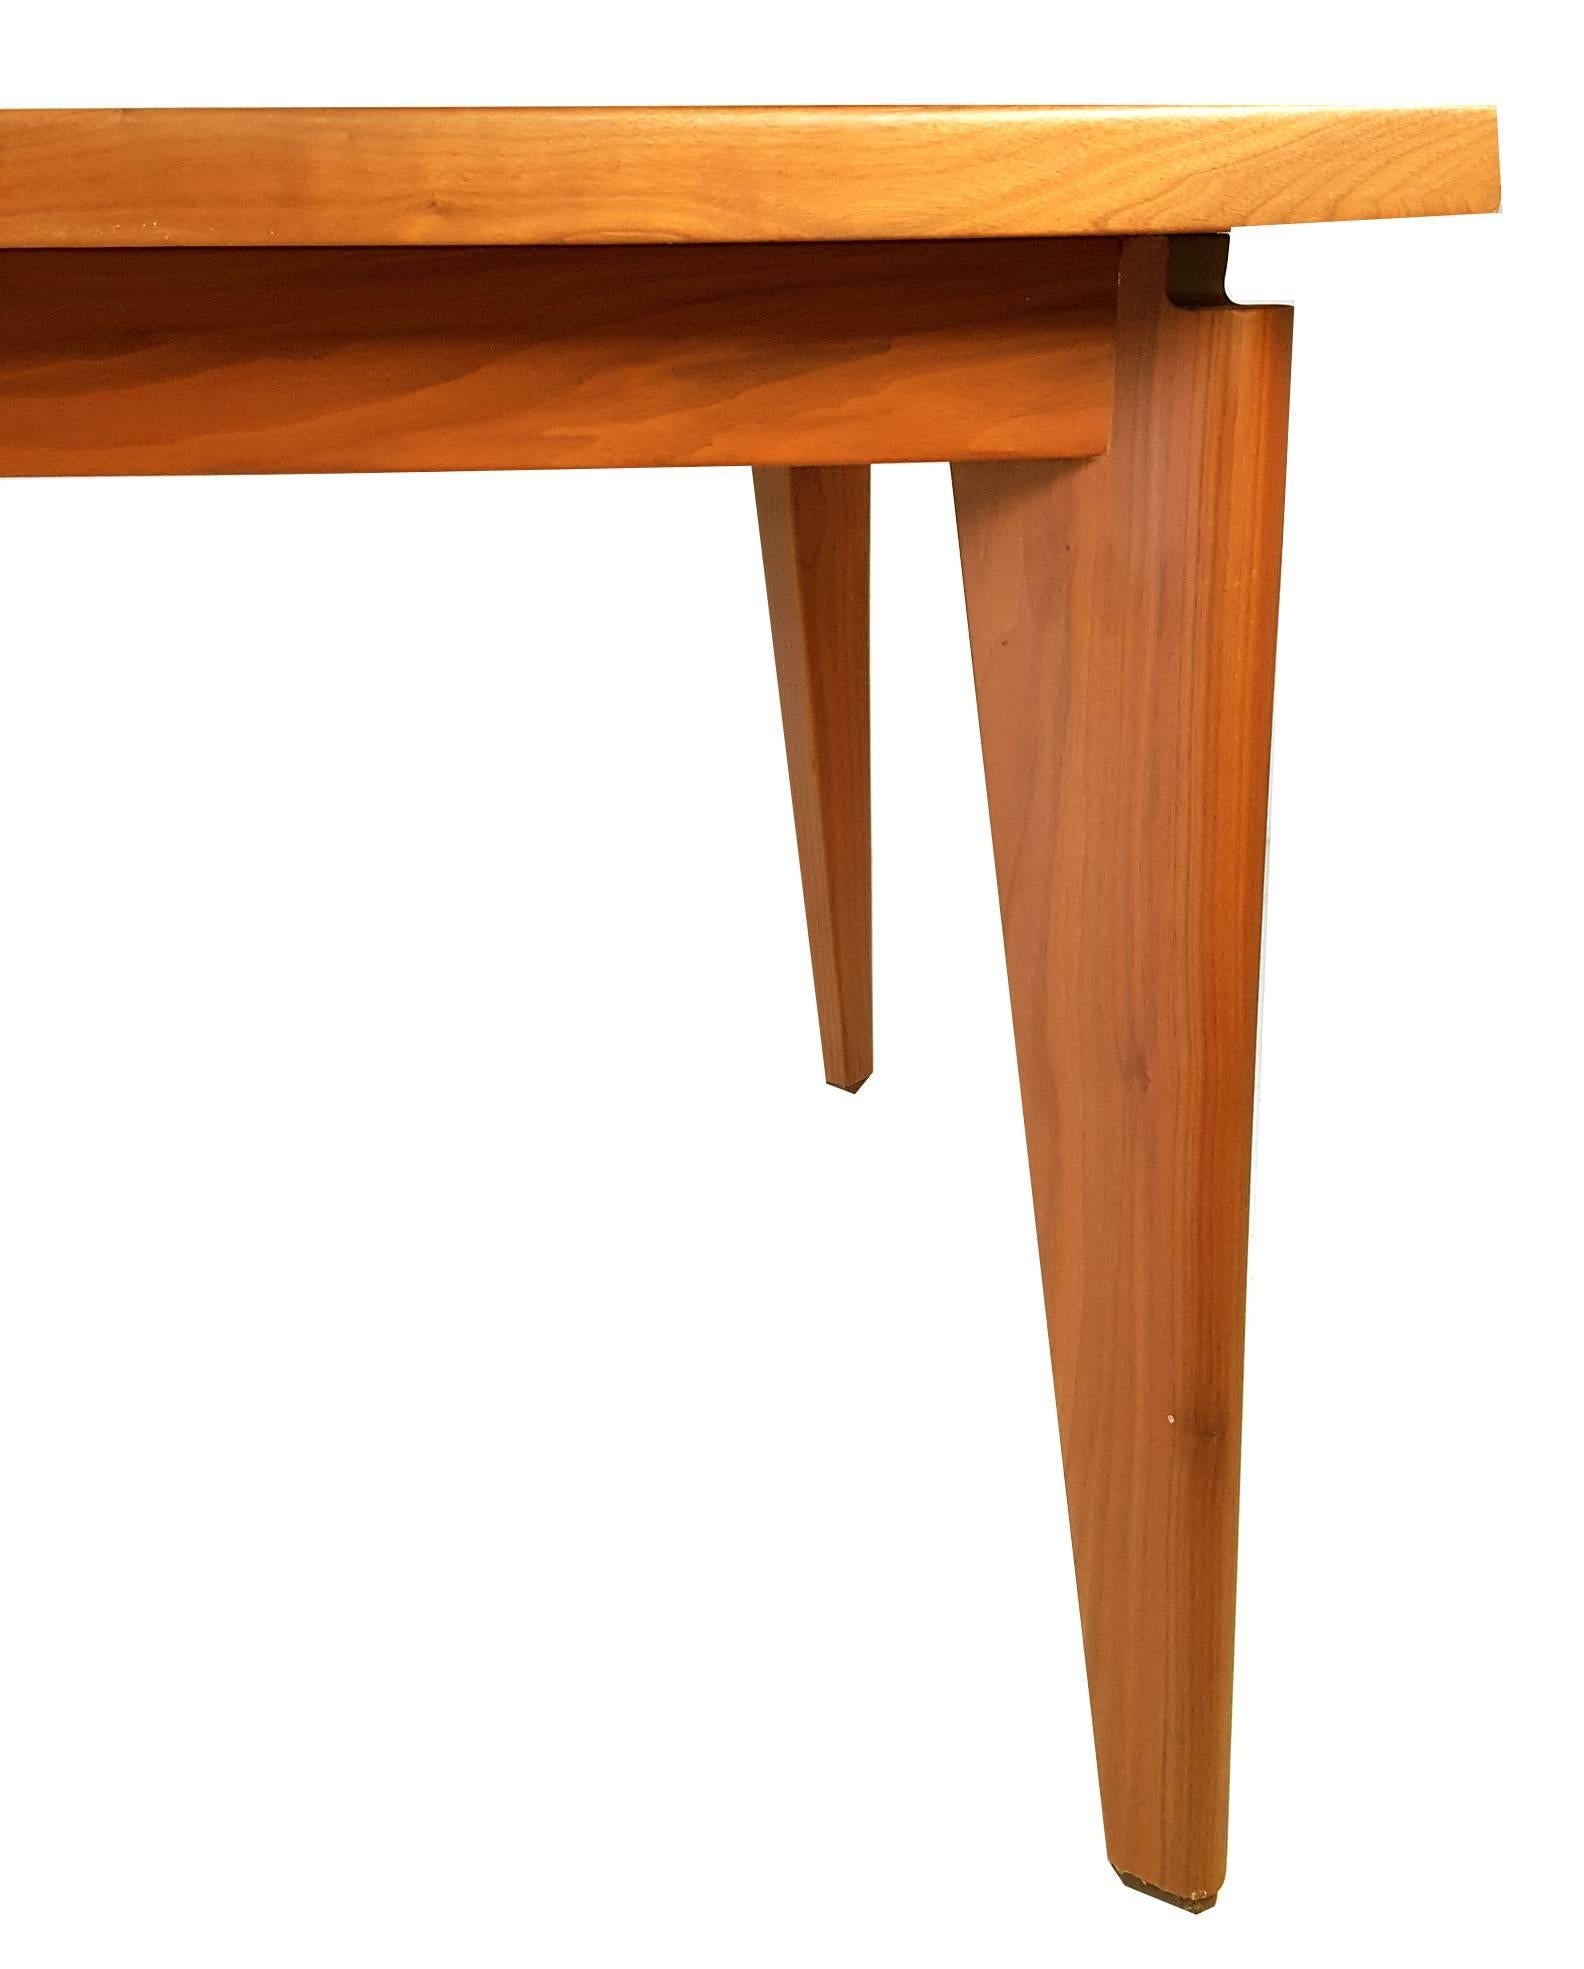 20th Century Custom-Made Solid Walnut Dining Table from the Studio of Ben Kanowsky